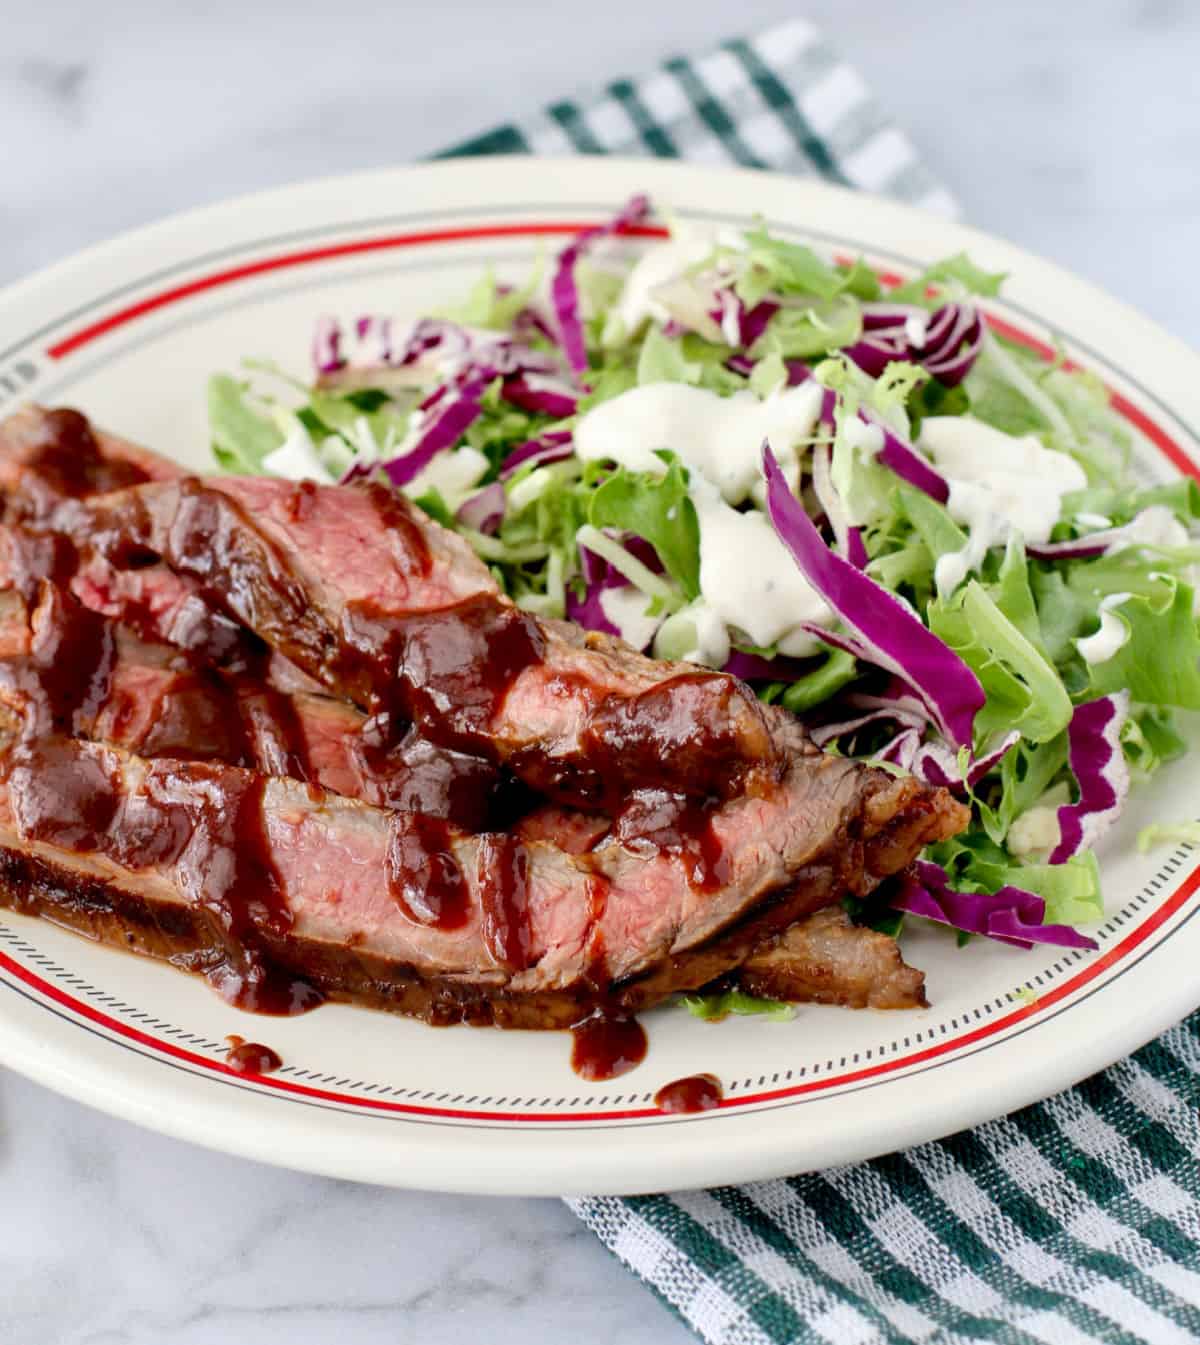 Blueberry Chipotle Grilled Flank Steak on a plate with a salad.